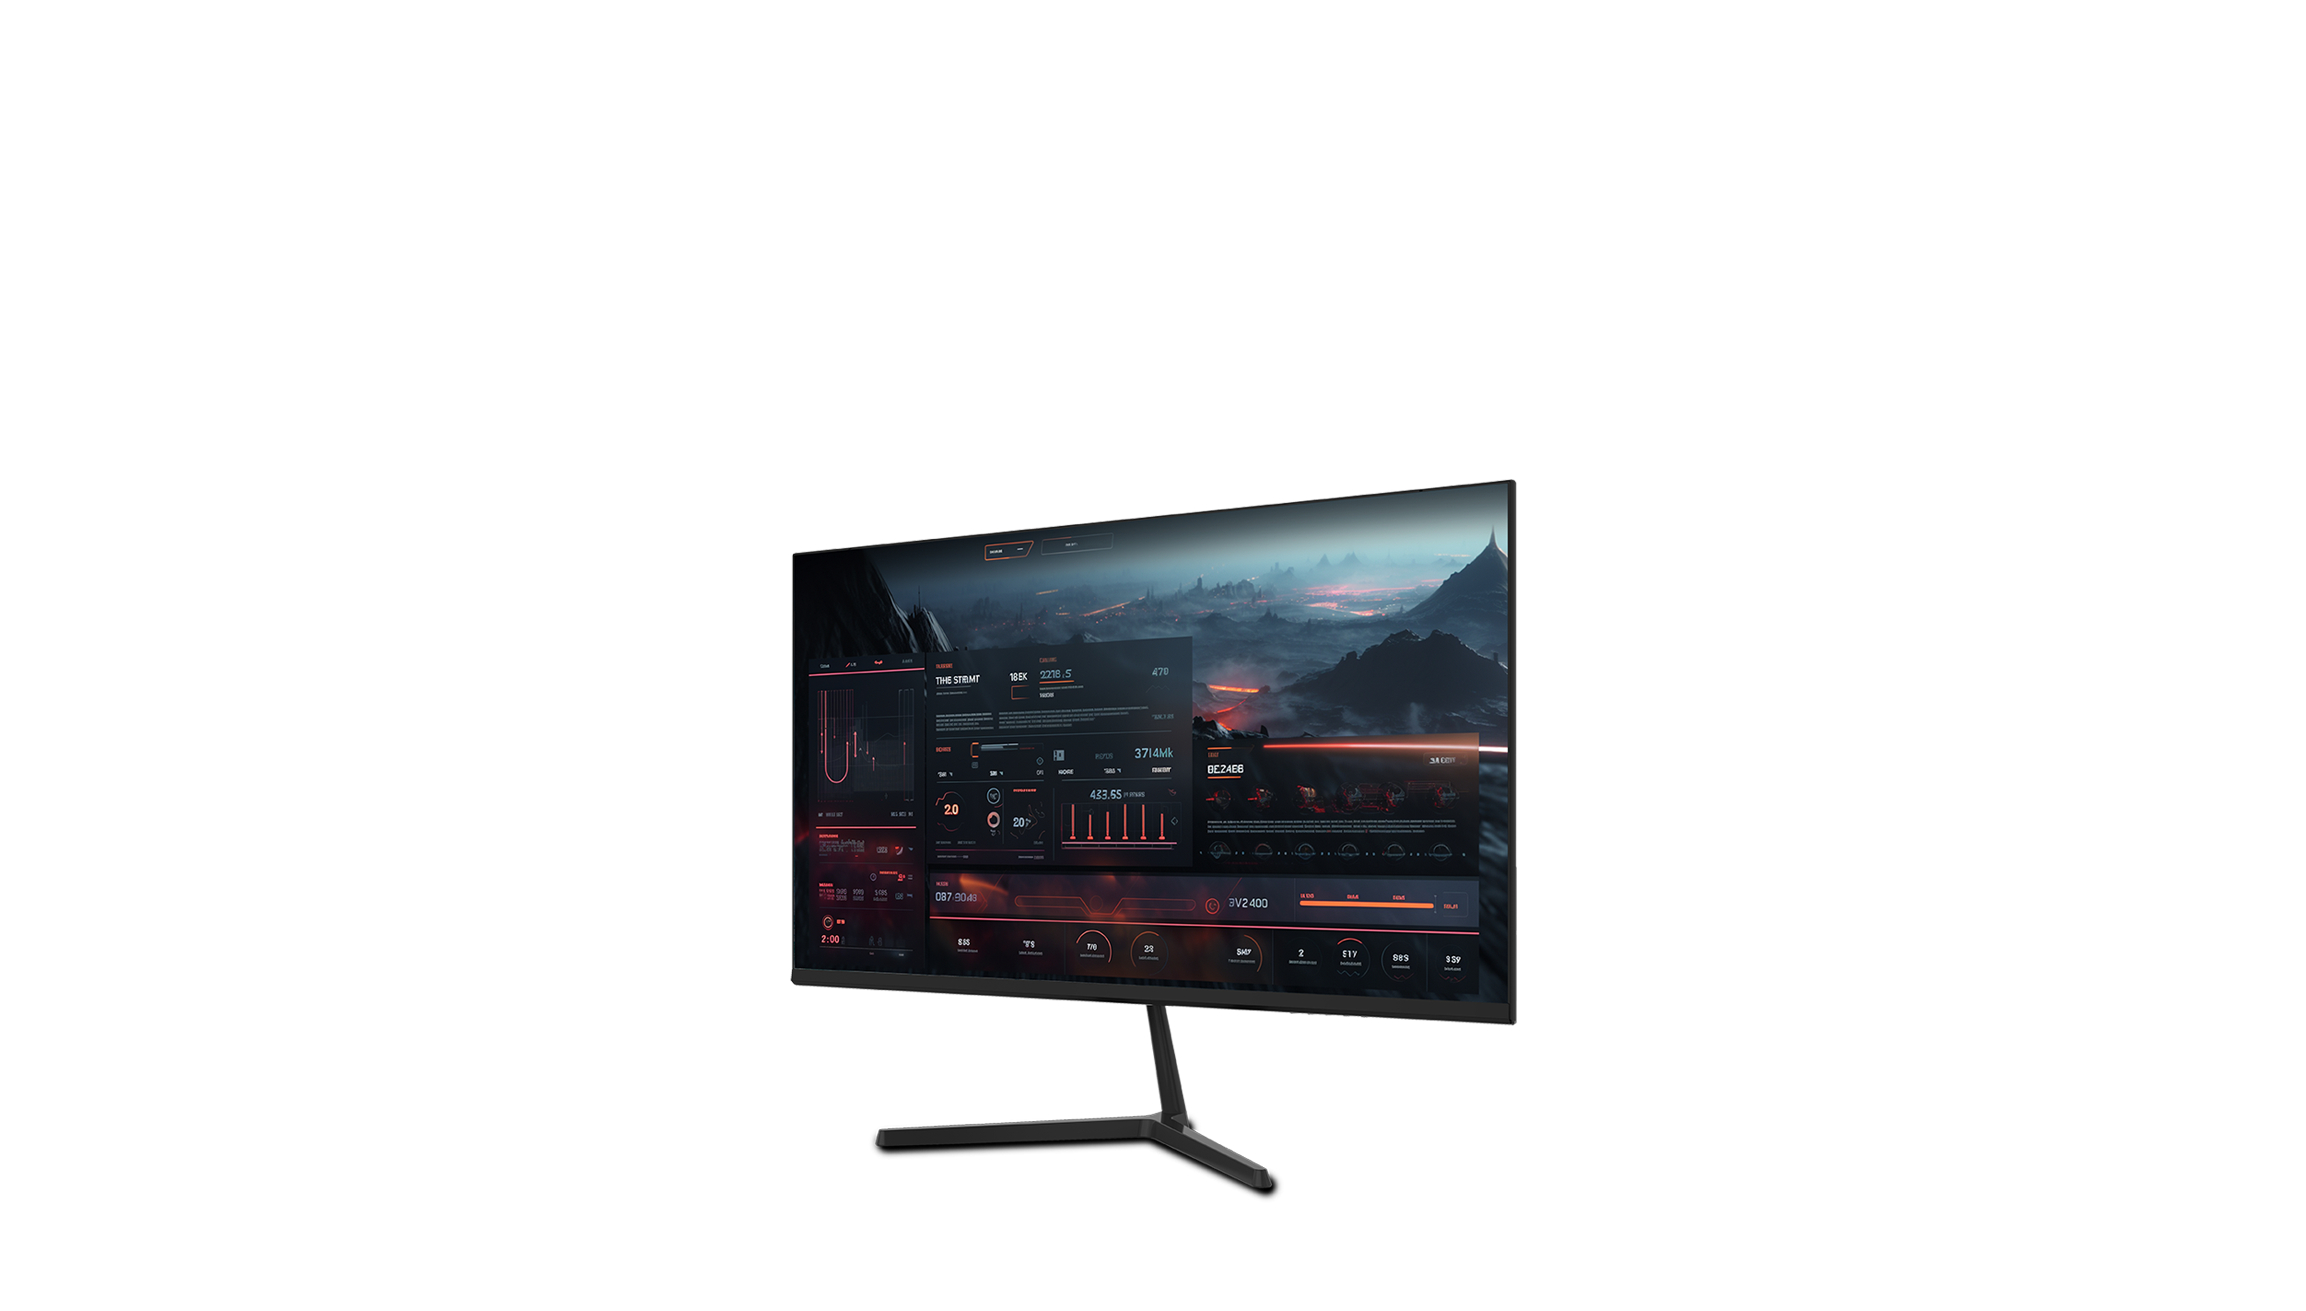 A 24 inch IPS Minifire X3 Business Monitor in FHD and 100Hz refresh rate displays high resolution gaming screen